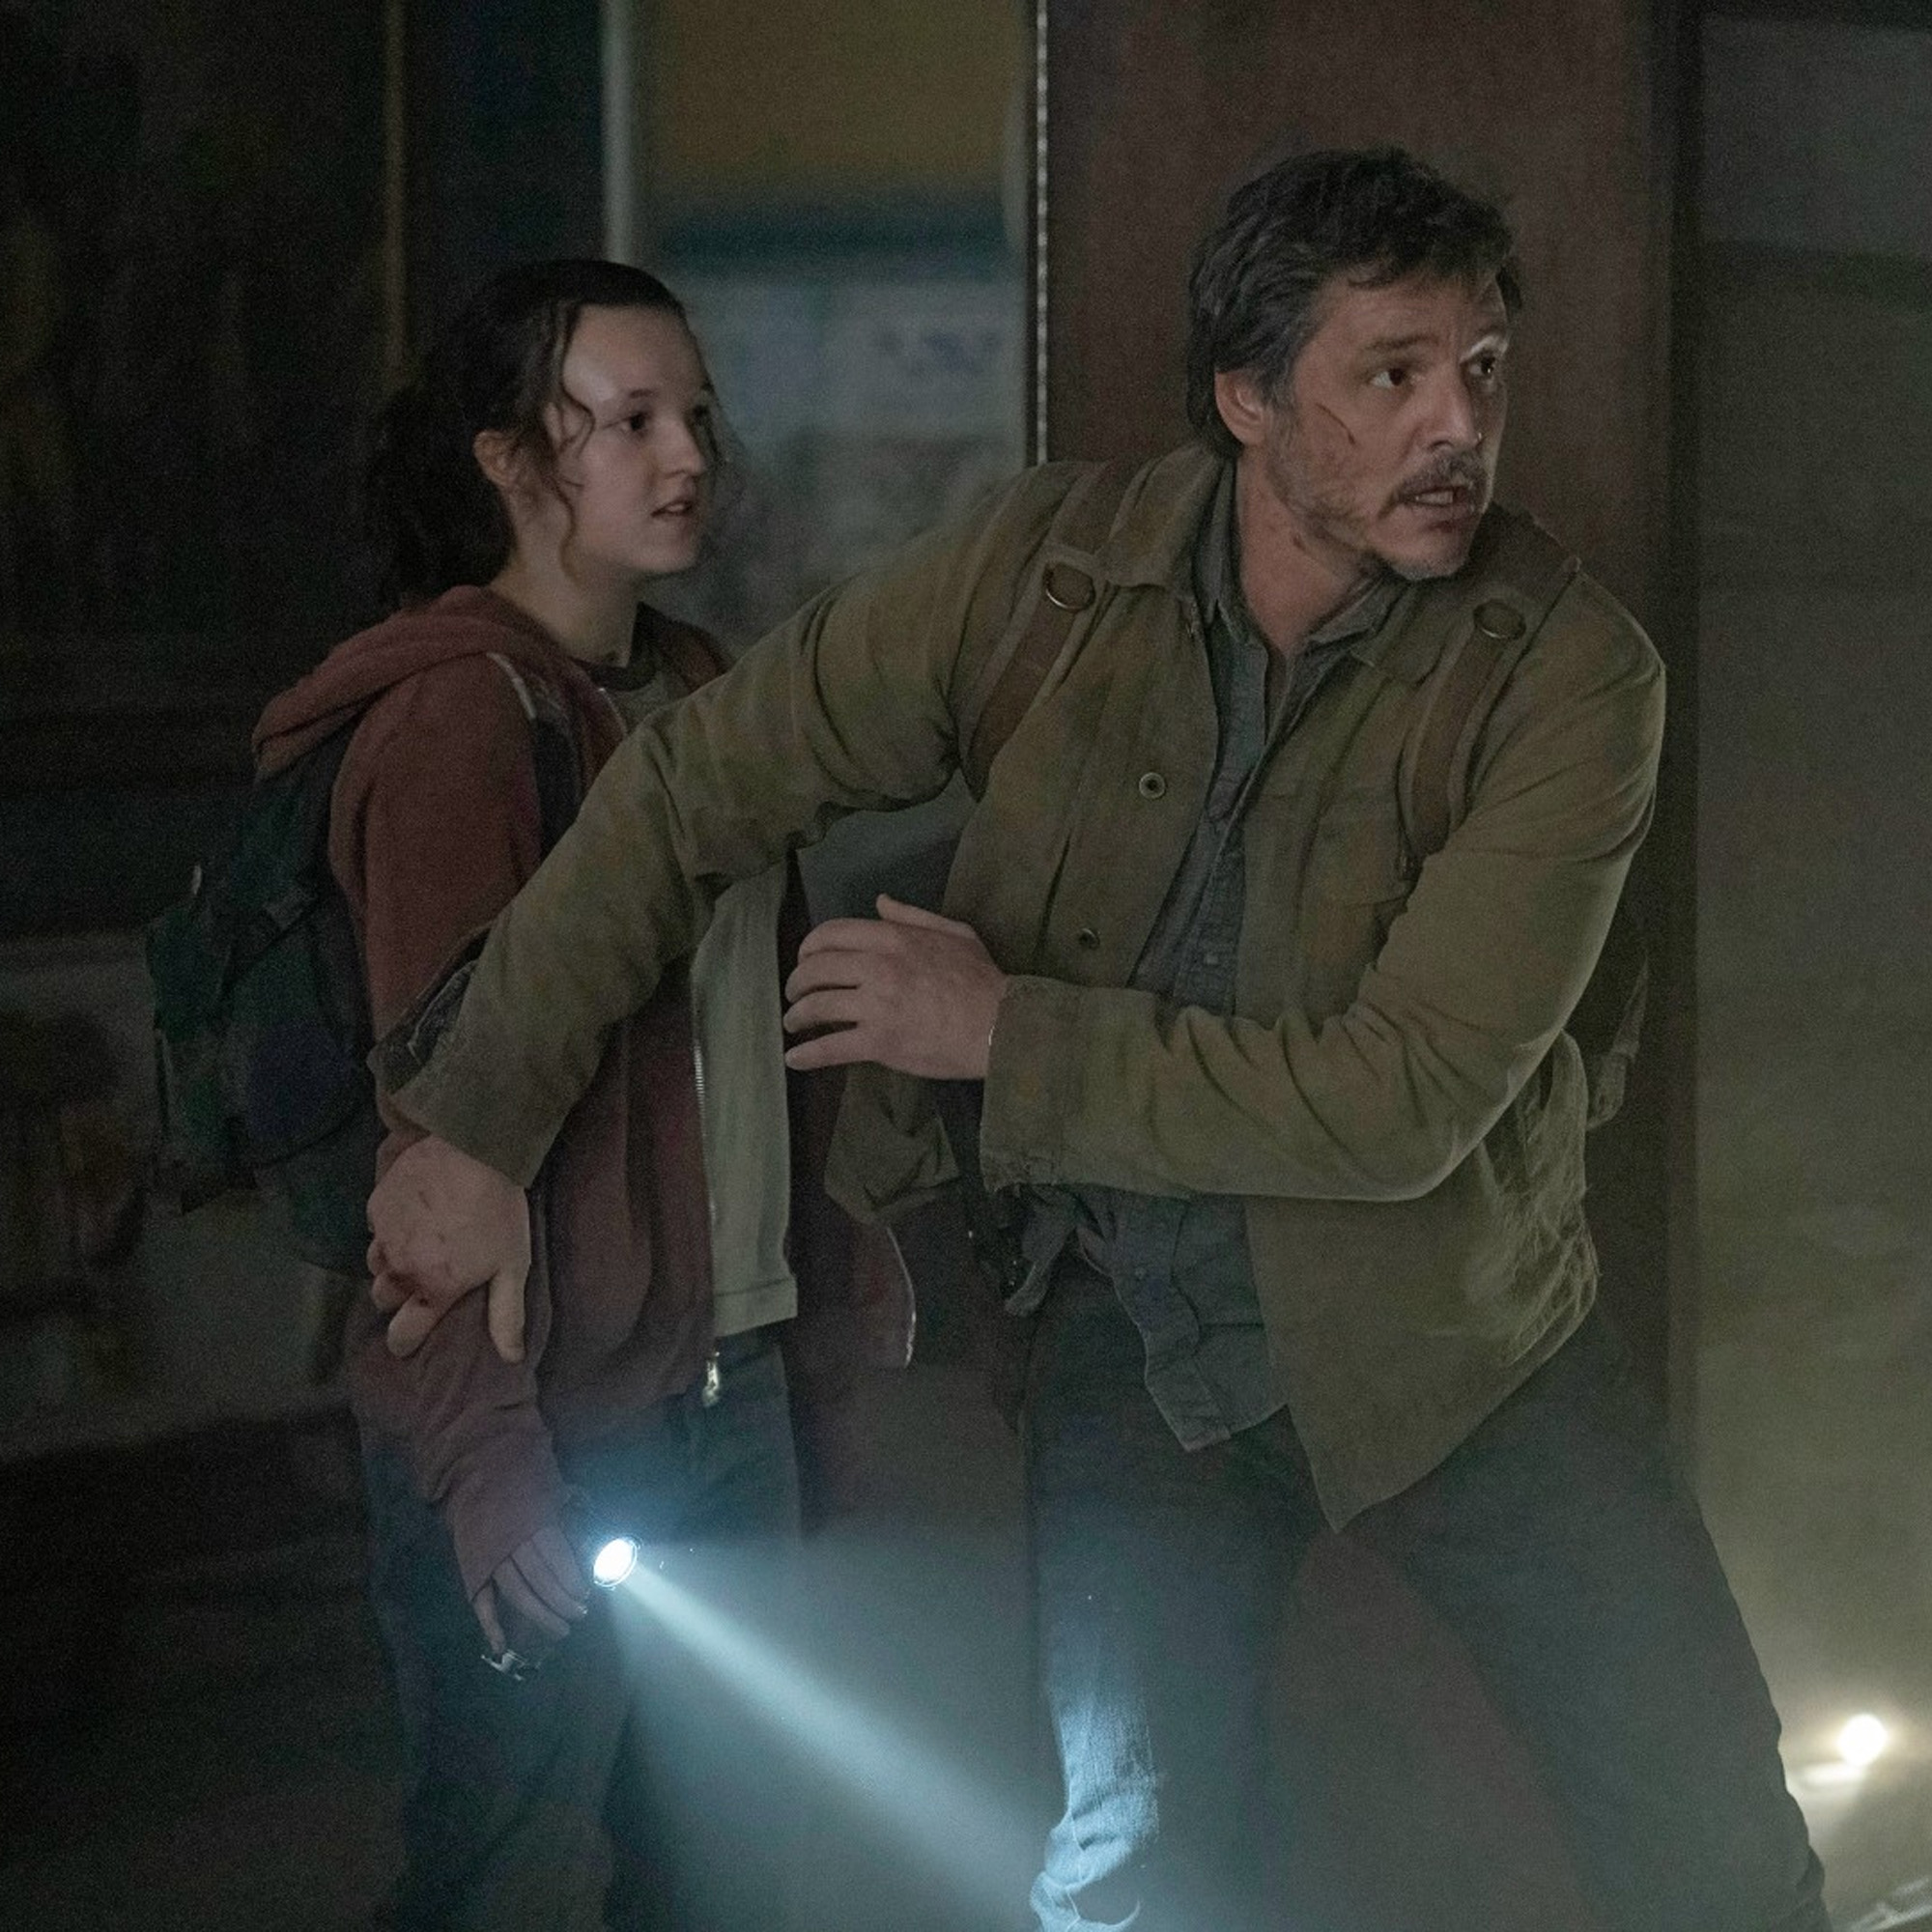 Bella Ramsey and Pedro Pascal in The Last of Us.